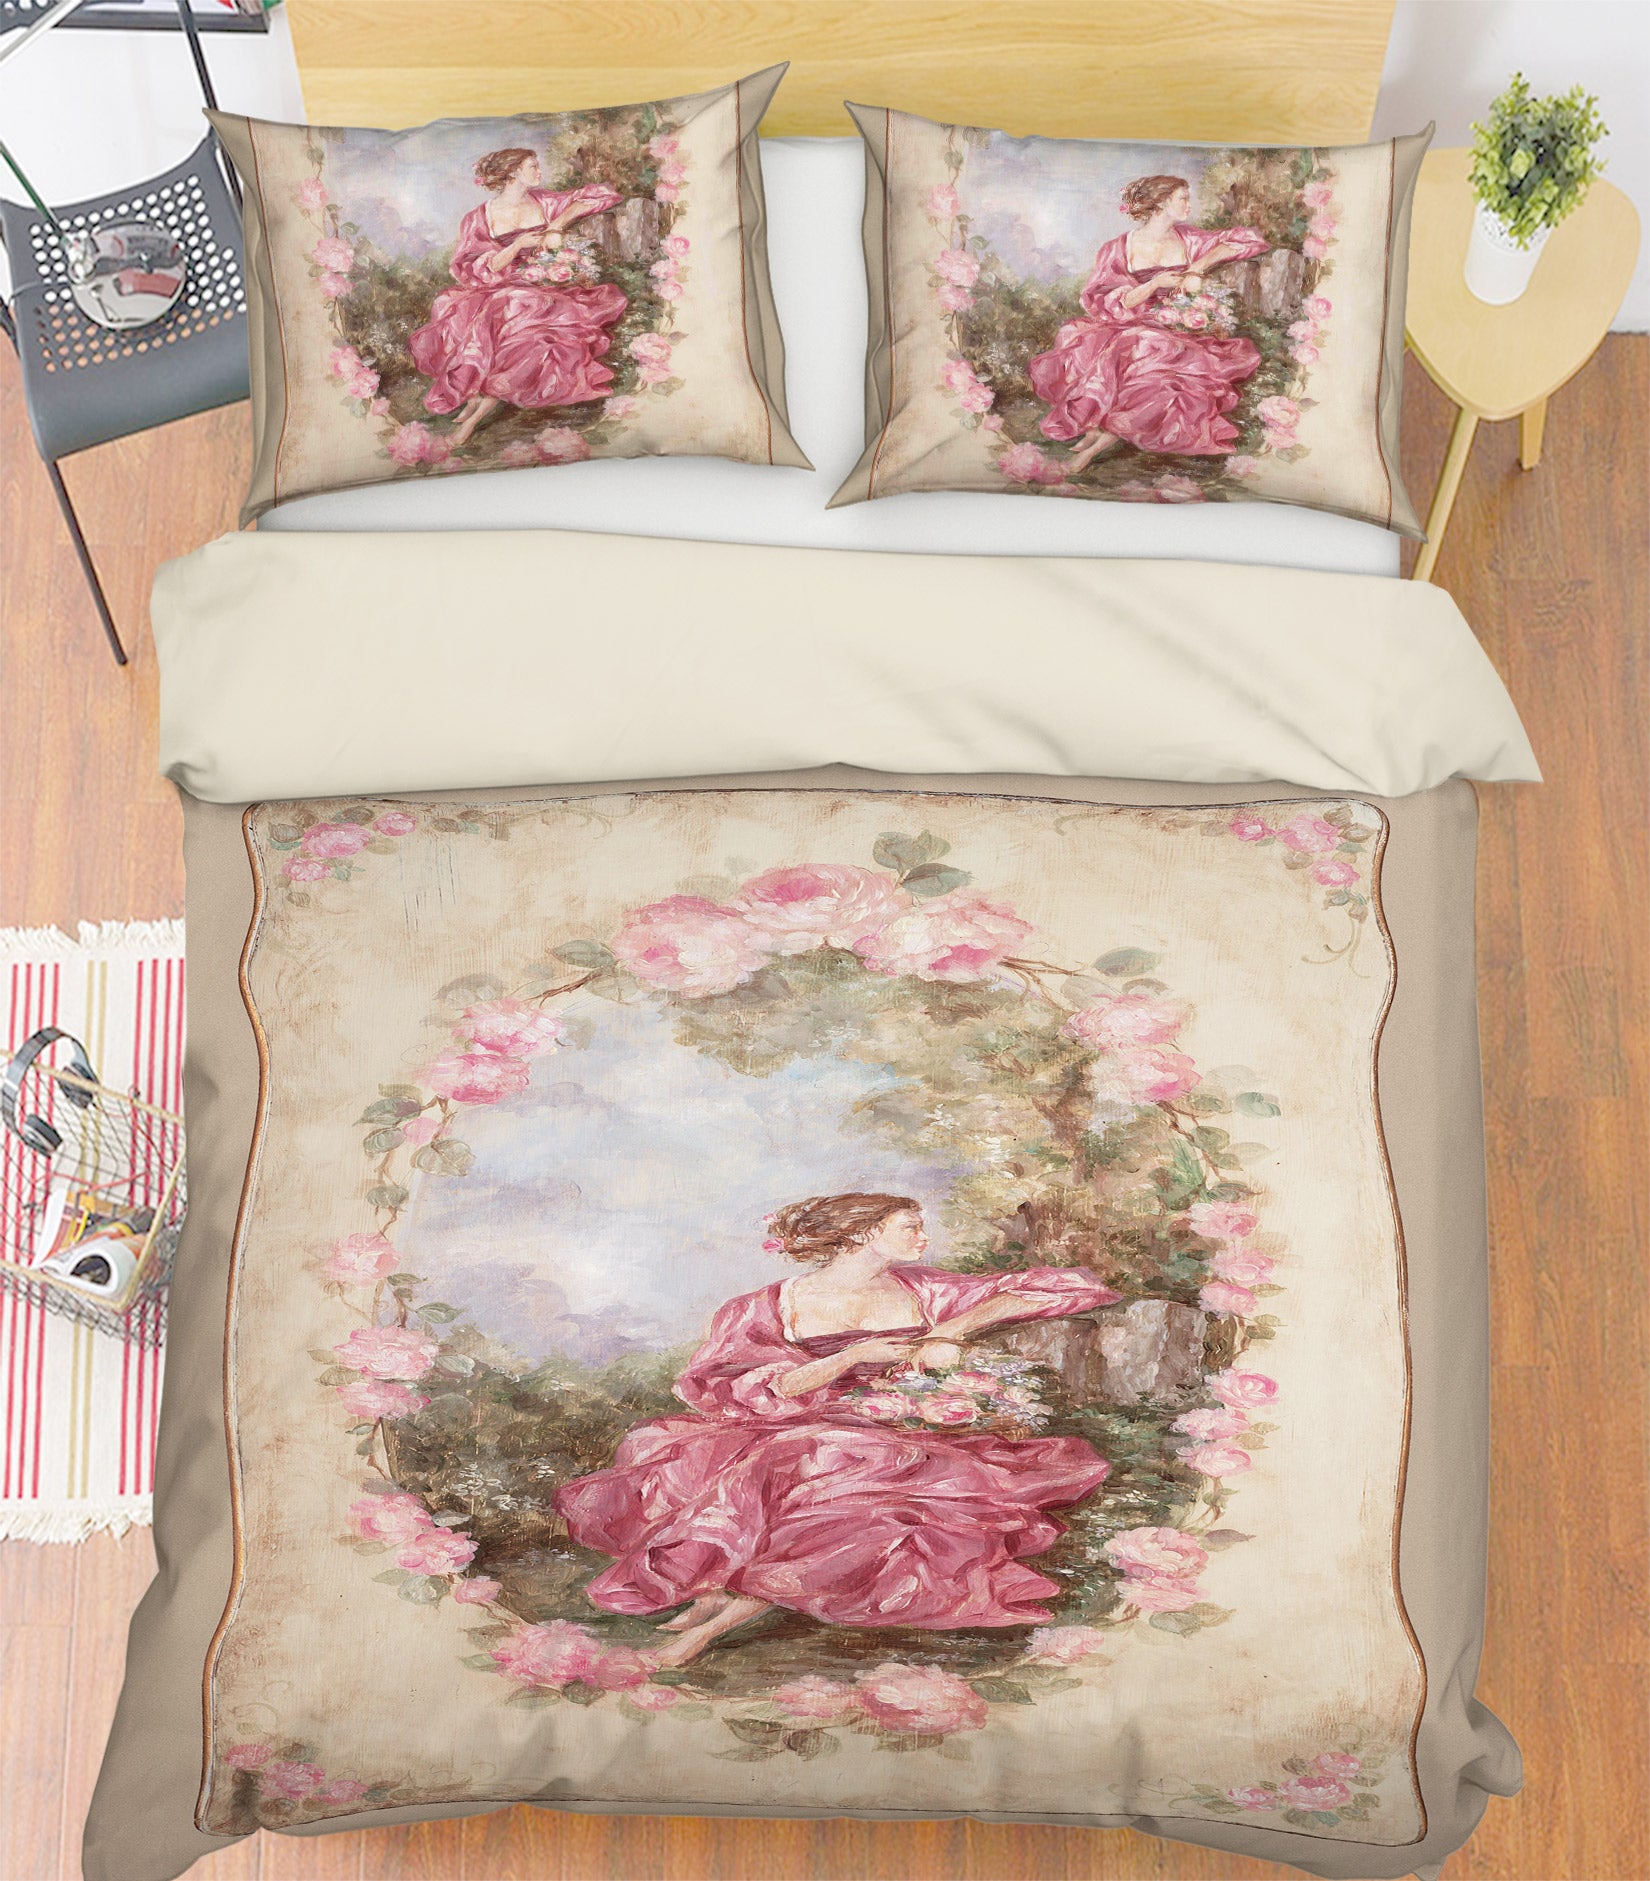 3D Noble Lady's Garden 2086 Debi Coules Bedding Bed Pillowcases Quilt